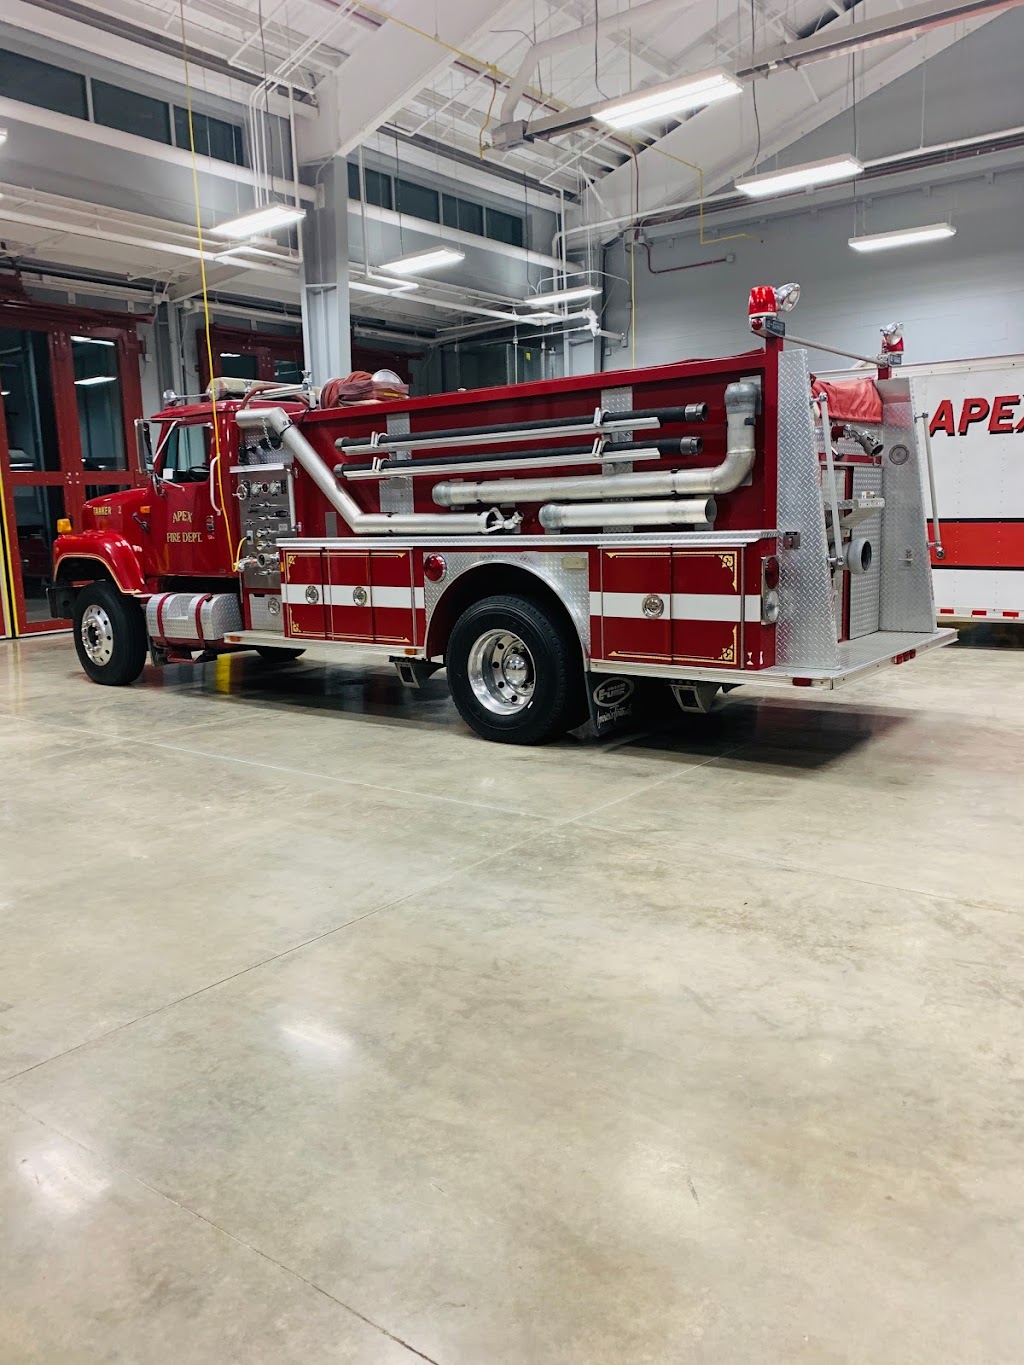 Town of Apex Public Safety Station 5 | 2050 Kelly Rd, Apex, NC 27502, USA | Phone: (919) 249-3400